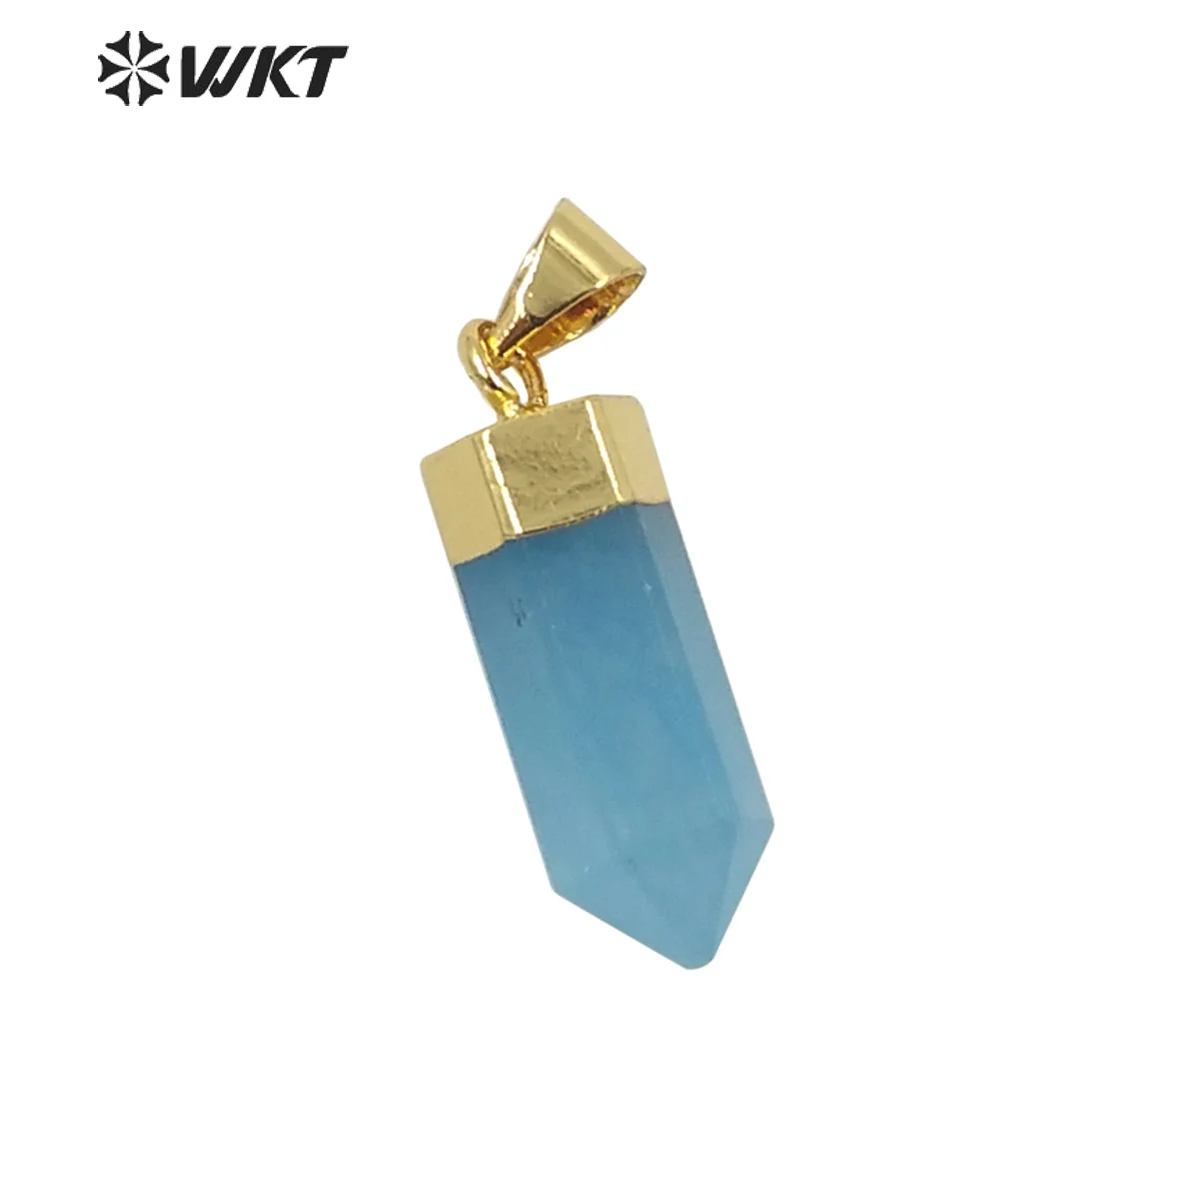 

WT-P1779 WKT Exquisite Natural Aqua Jade Pendant Hexagonal Cone Can Be Made Into Necklace Earrings Women Jewelry